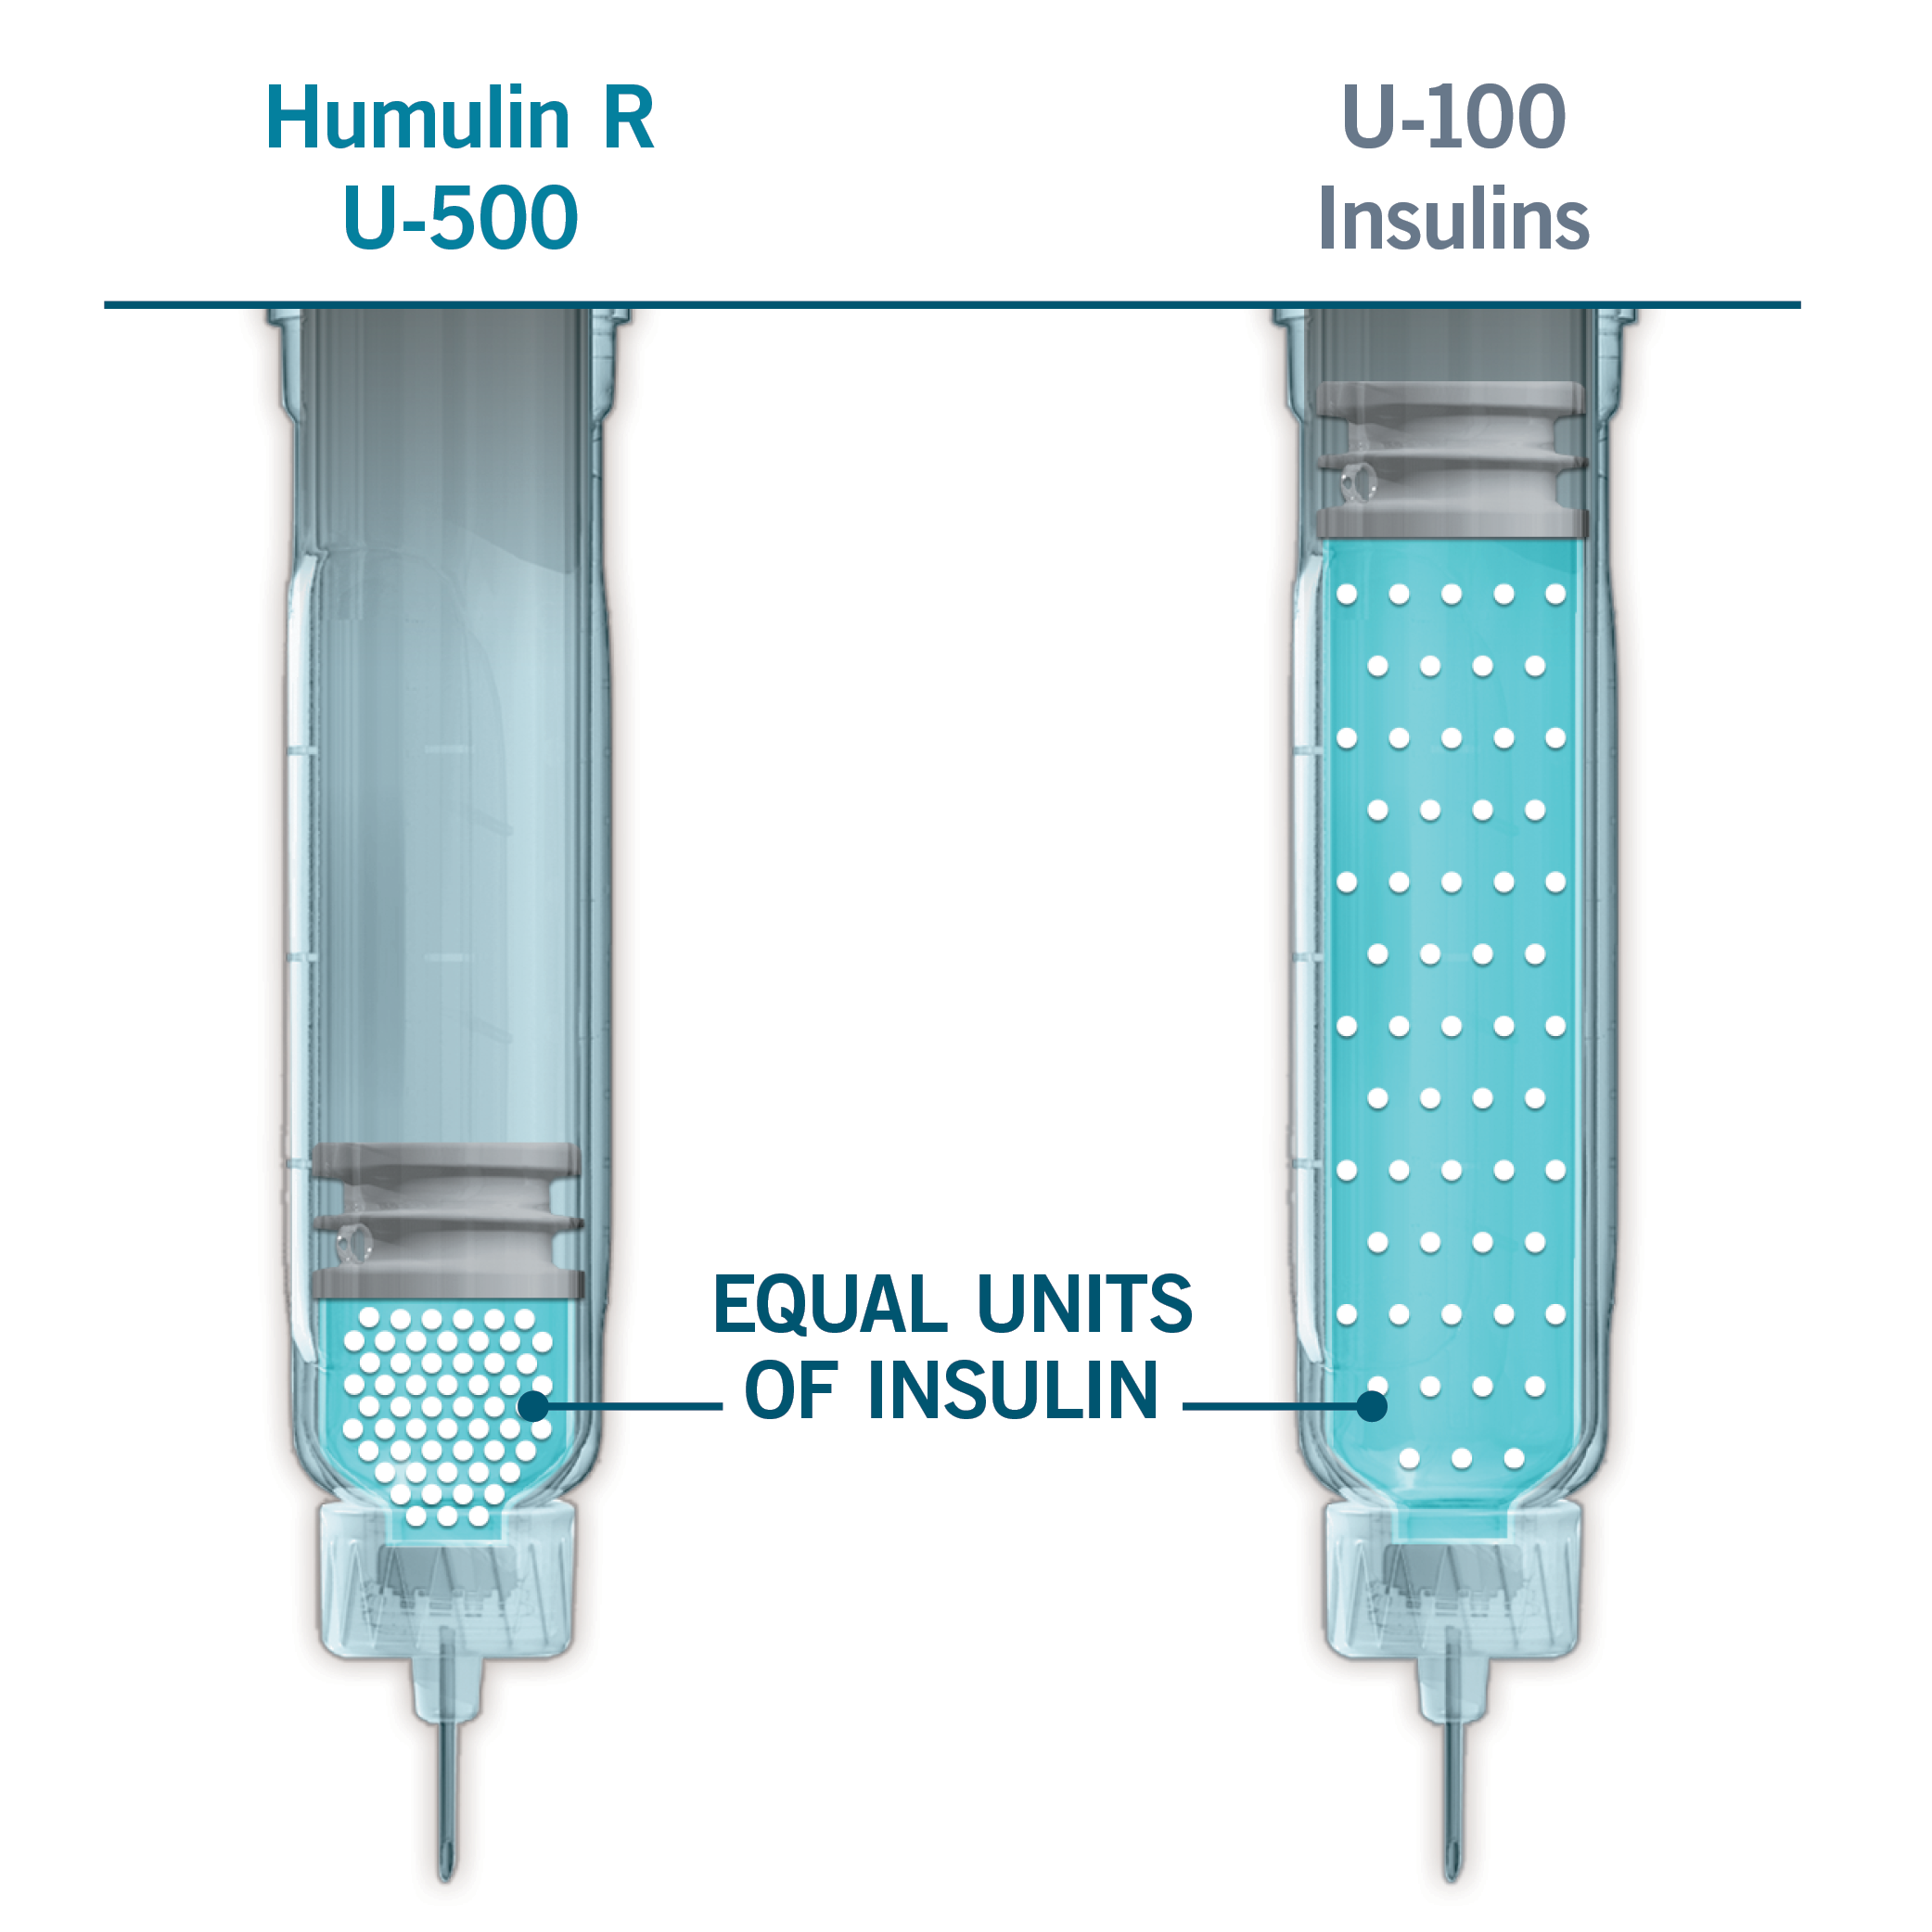 Two syringes are depicted, showing the different volume of liquid needed to inject an equal amount of insulin between Humulin R U-500 insulin and U-100 insulins. The U-500 dose is shown as being 80% less volume than the U-100 dose.